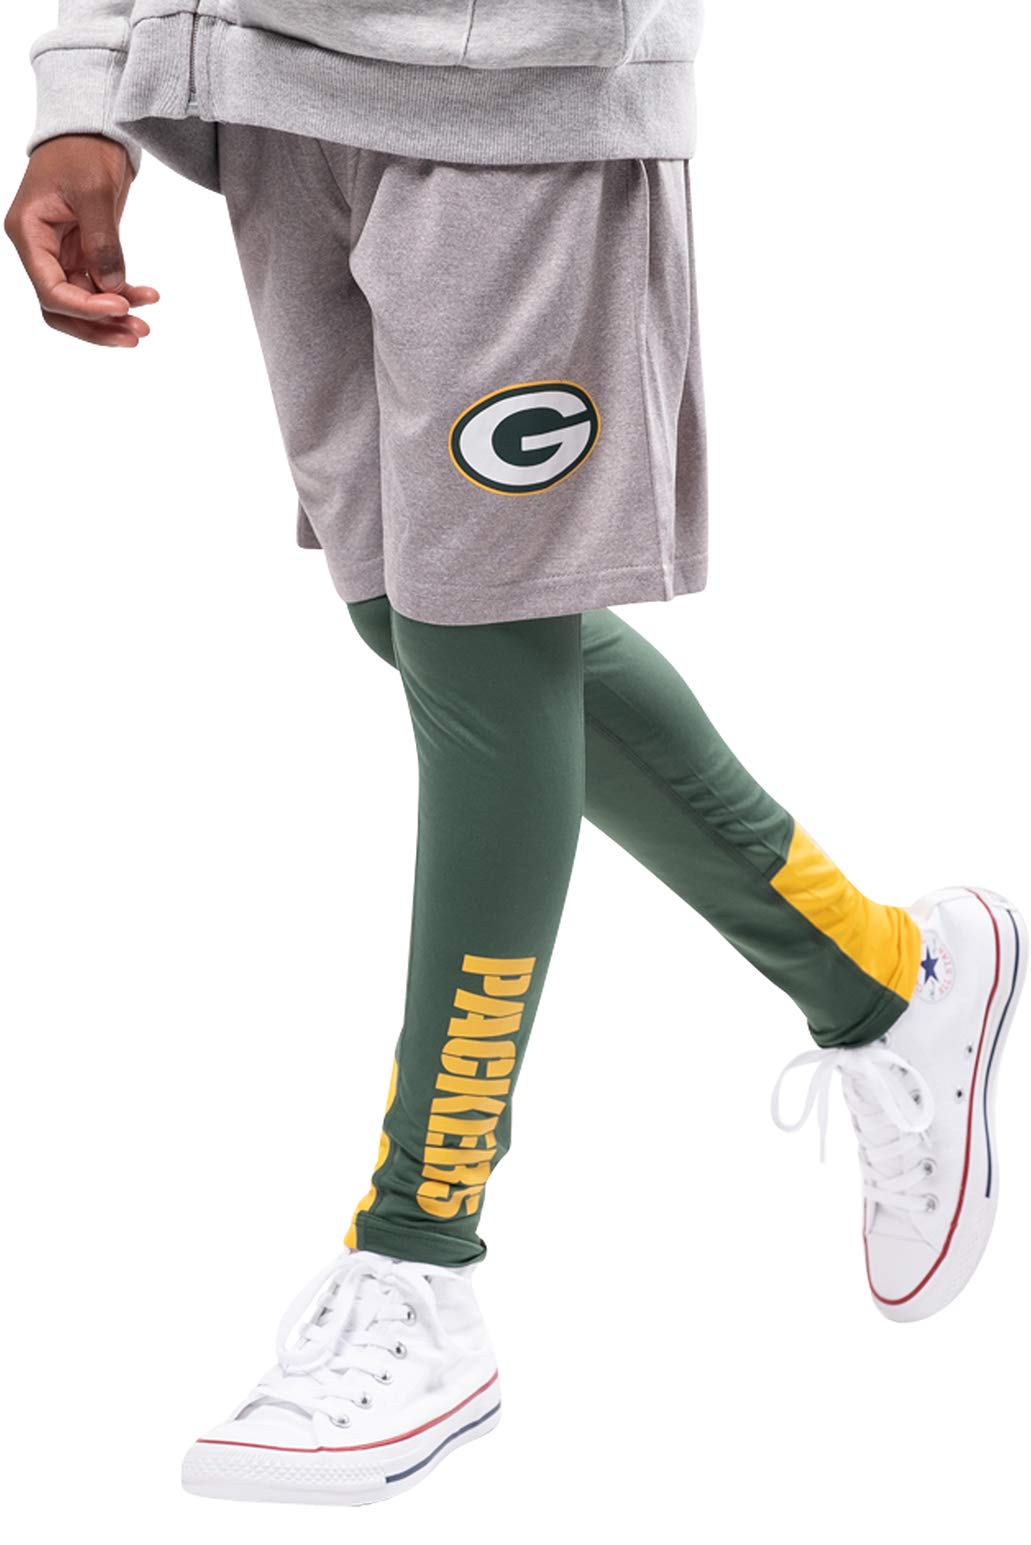 Ultra Game NFL Green Bay Packers Youth 2 Piece Leggings & Shorts Training Compression Set|Green Bay Packers - UltraGameShop